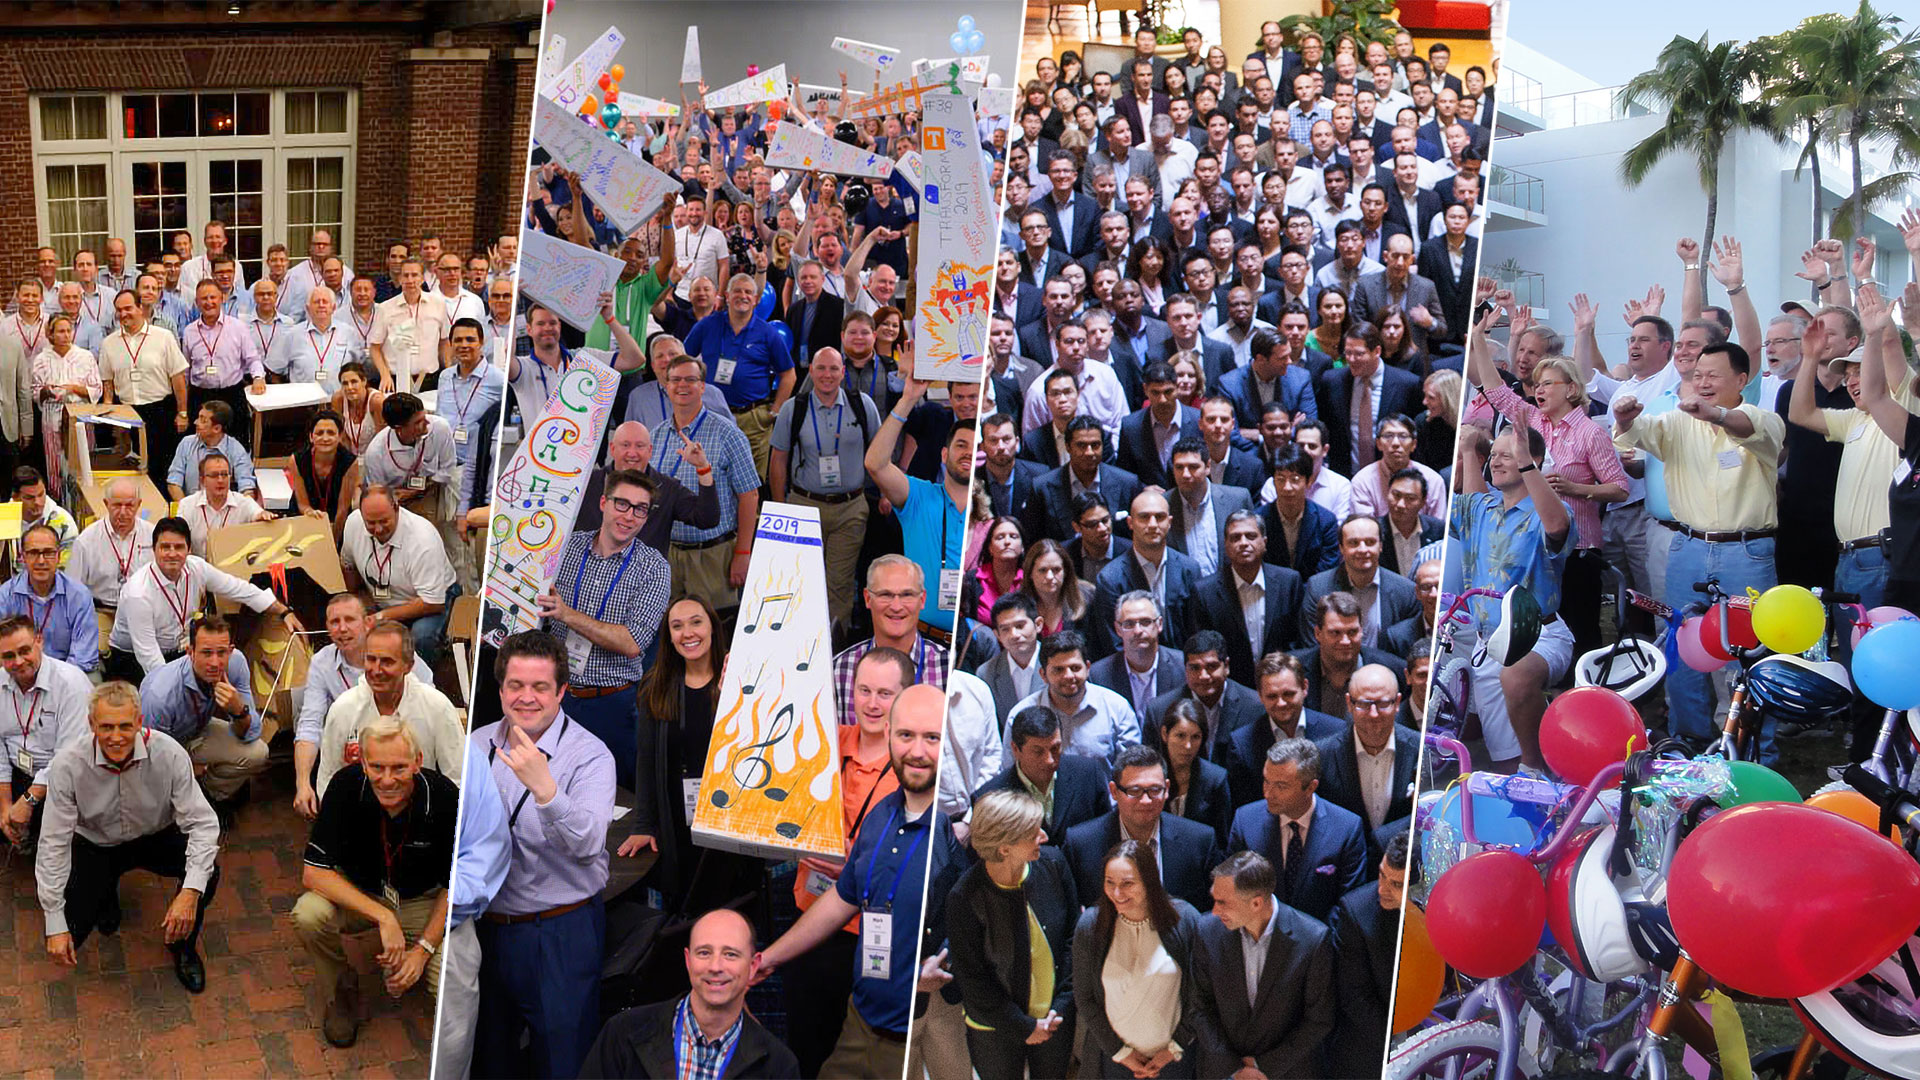 A collage of four group photos: people seated and standing in business attire, individuals with colorful art pieces, a large gathering of suited professionals, and people celebrating with balloons and motorcycles at one of the Best Corporate Events.